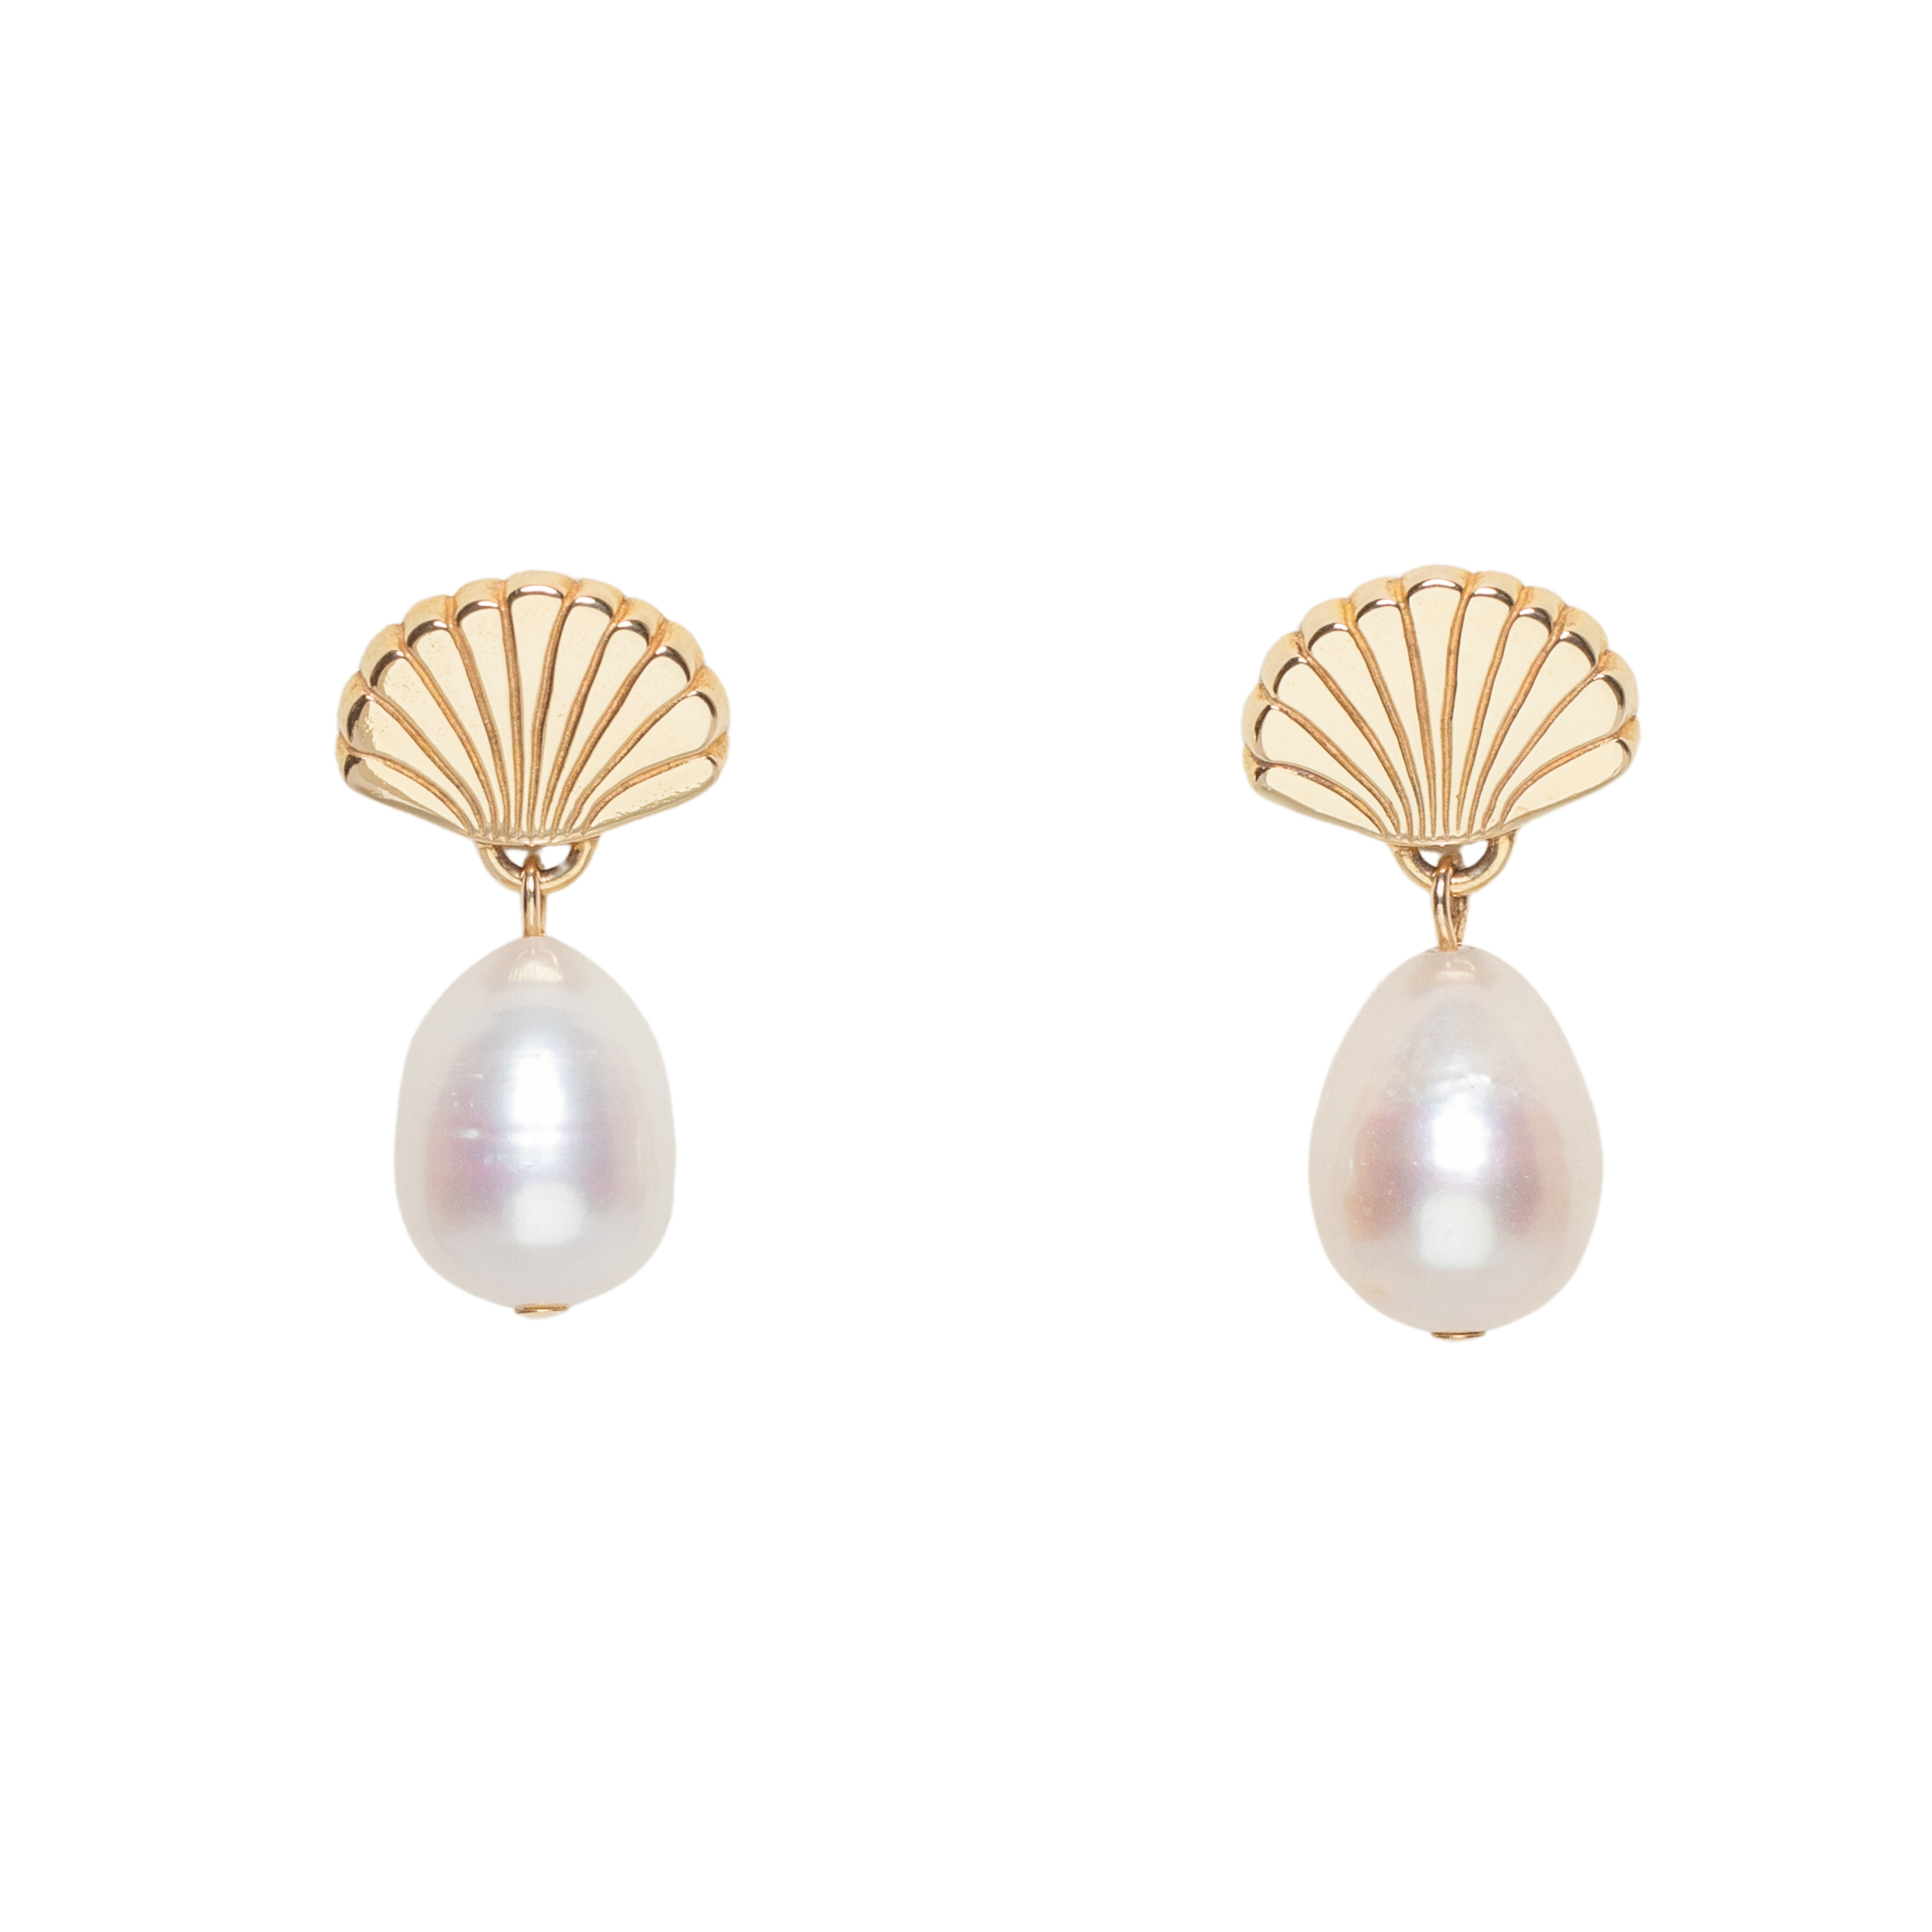 The Petite Coquille Earrings